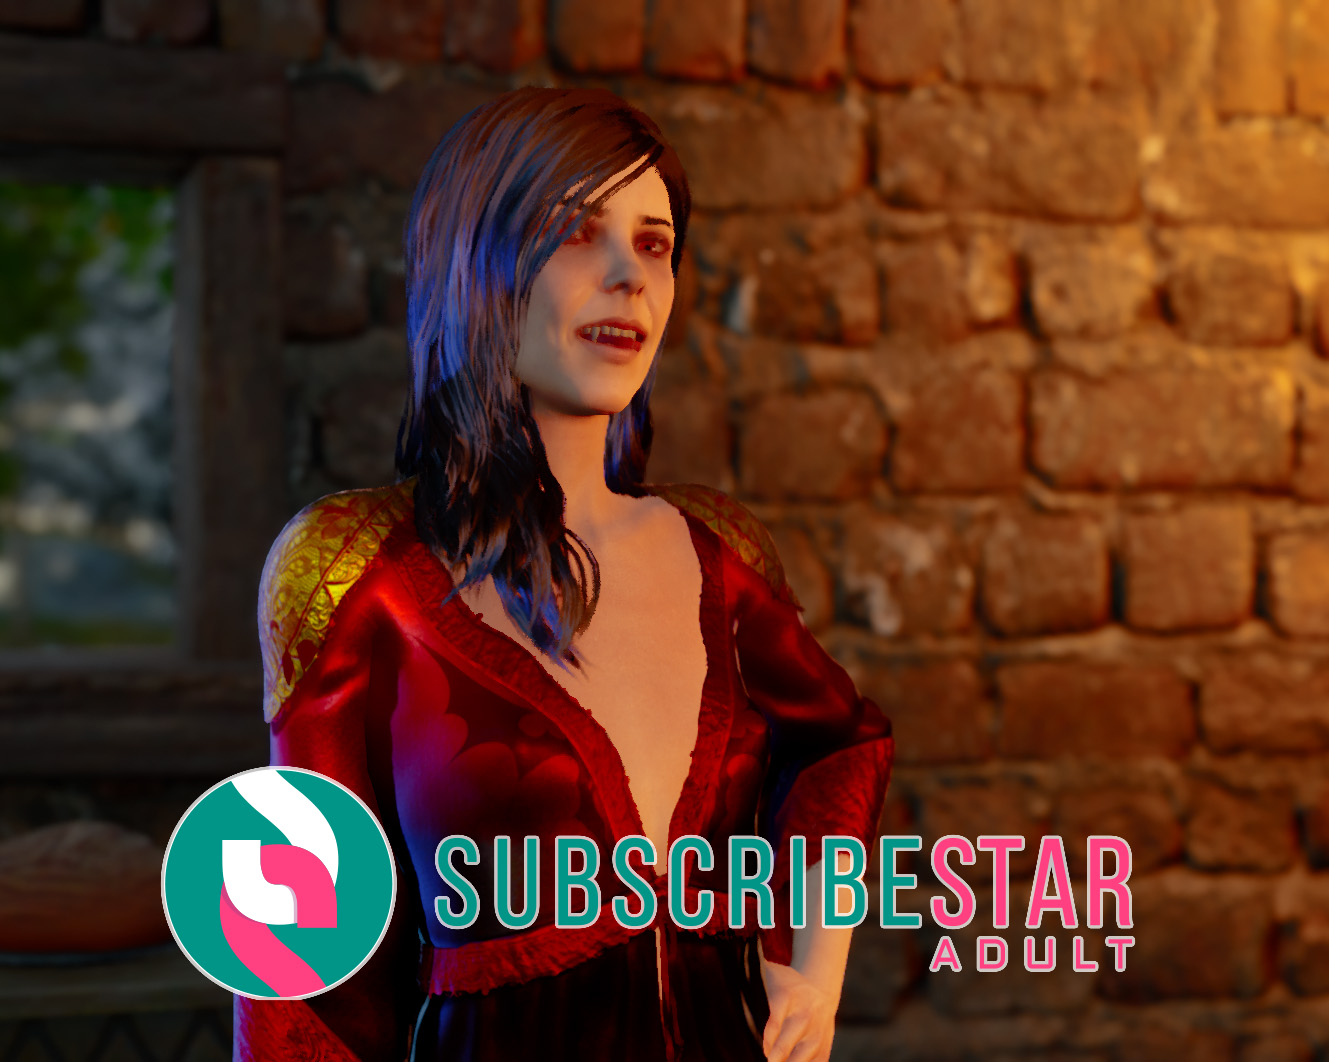 Subscriber star adult